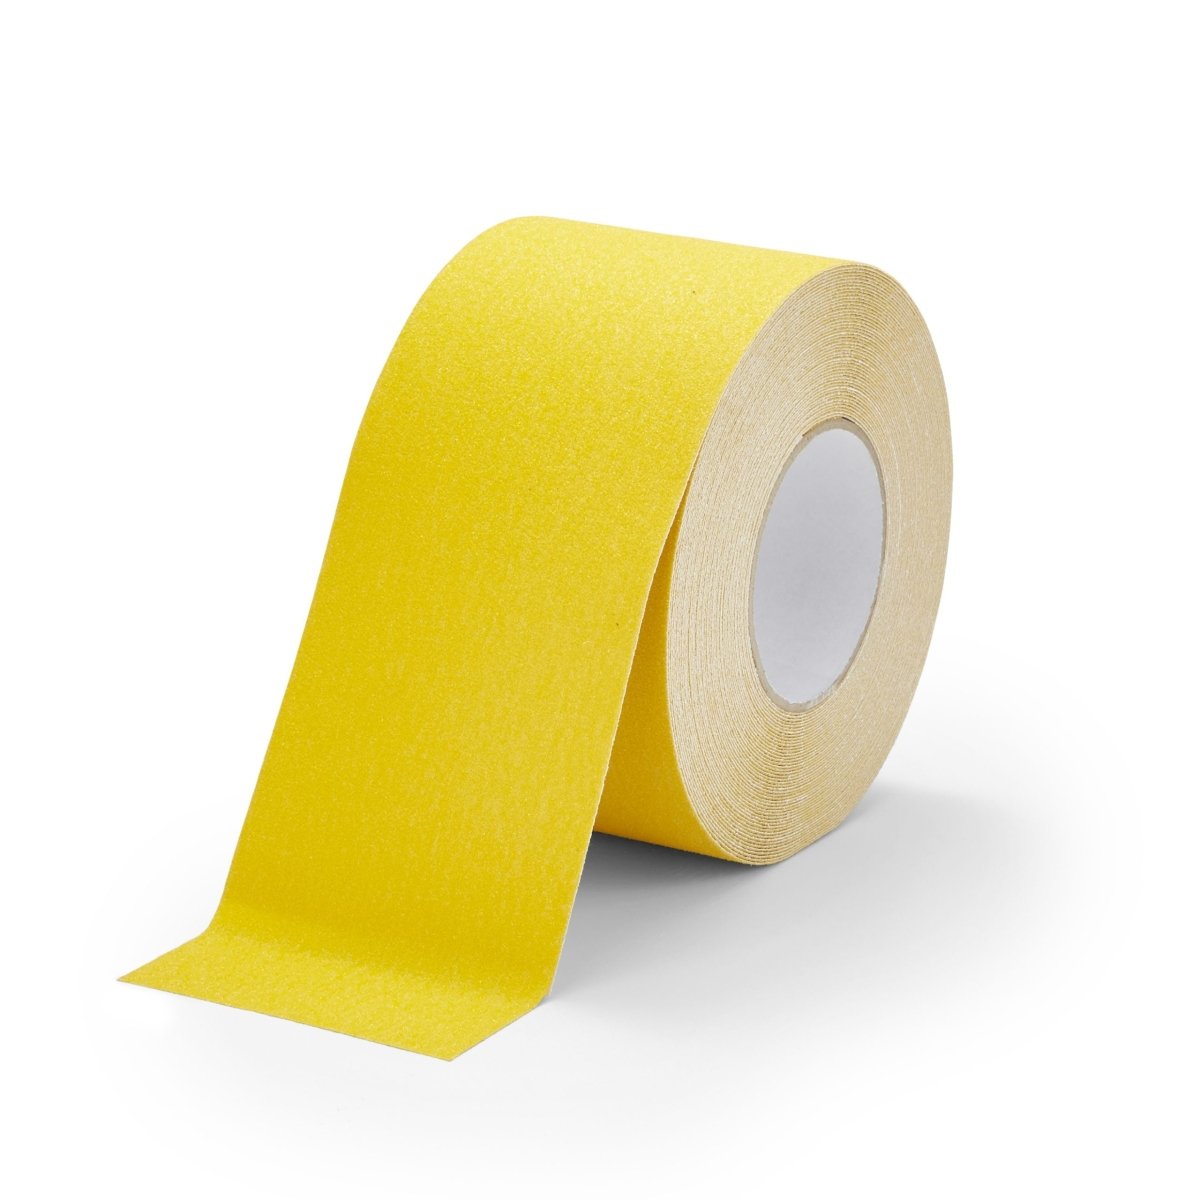 Conformable Traction Grade Anti Slip Tape Rolls - Slips Away - Conformable Anti-Slip Tape - H3406Y-Conformable-Safety-Grip-Yellow-100mm-1-1 -